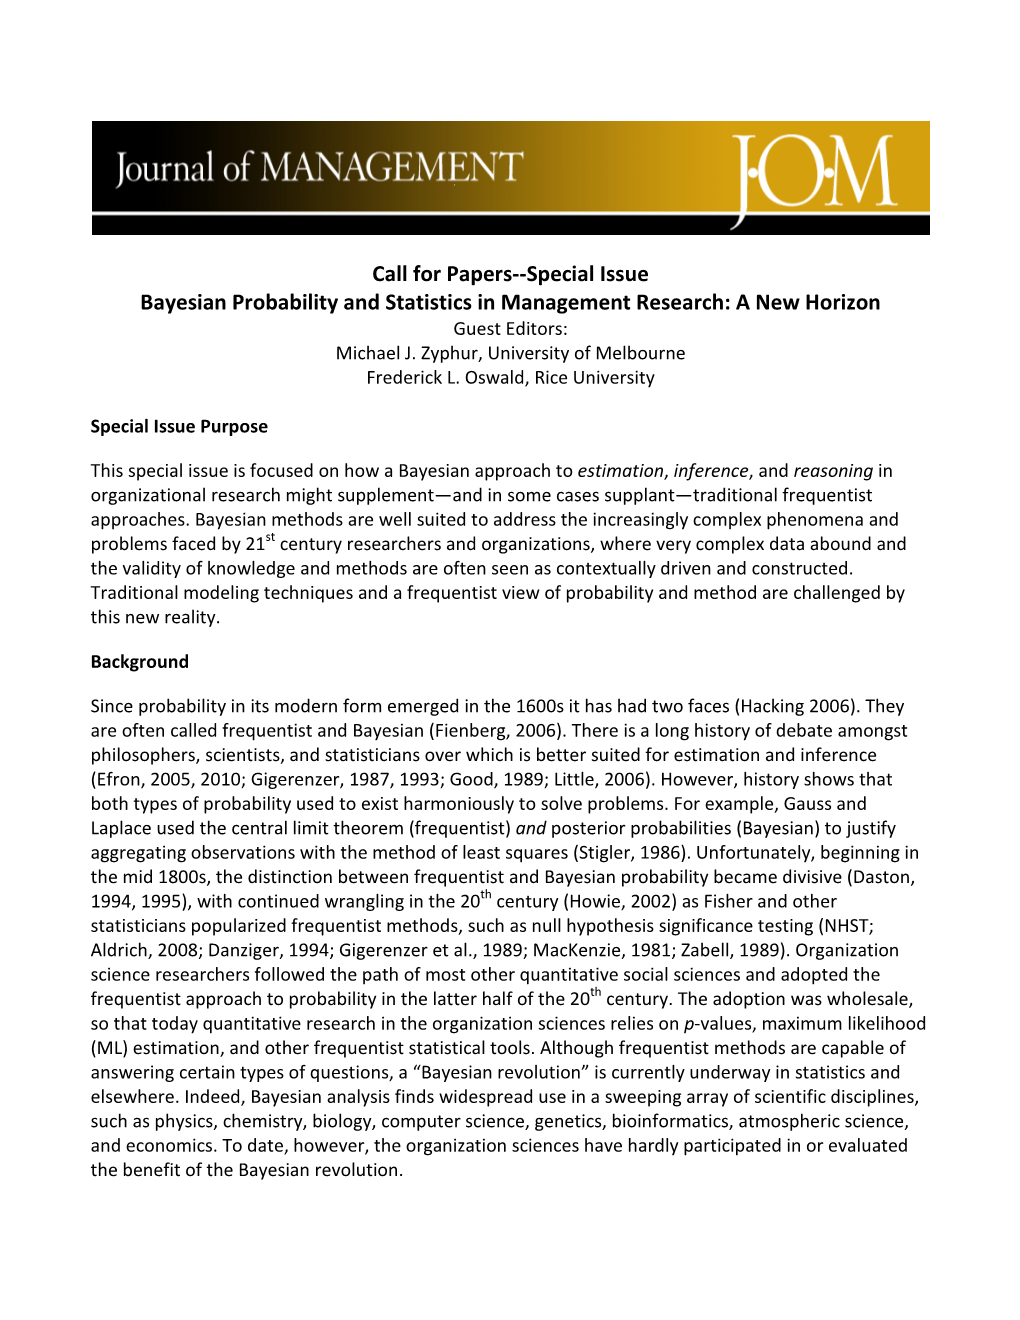 Call for Papers--Special Issue Bayesian Probability and Statistics in Management Research: a New Horizon Guest Editors: Michael J